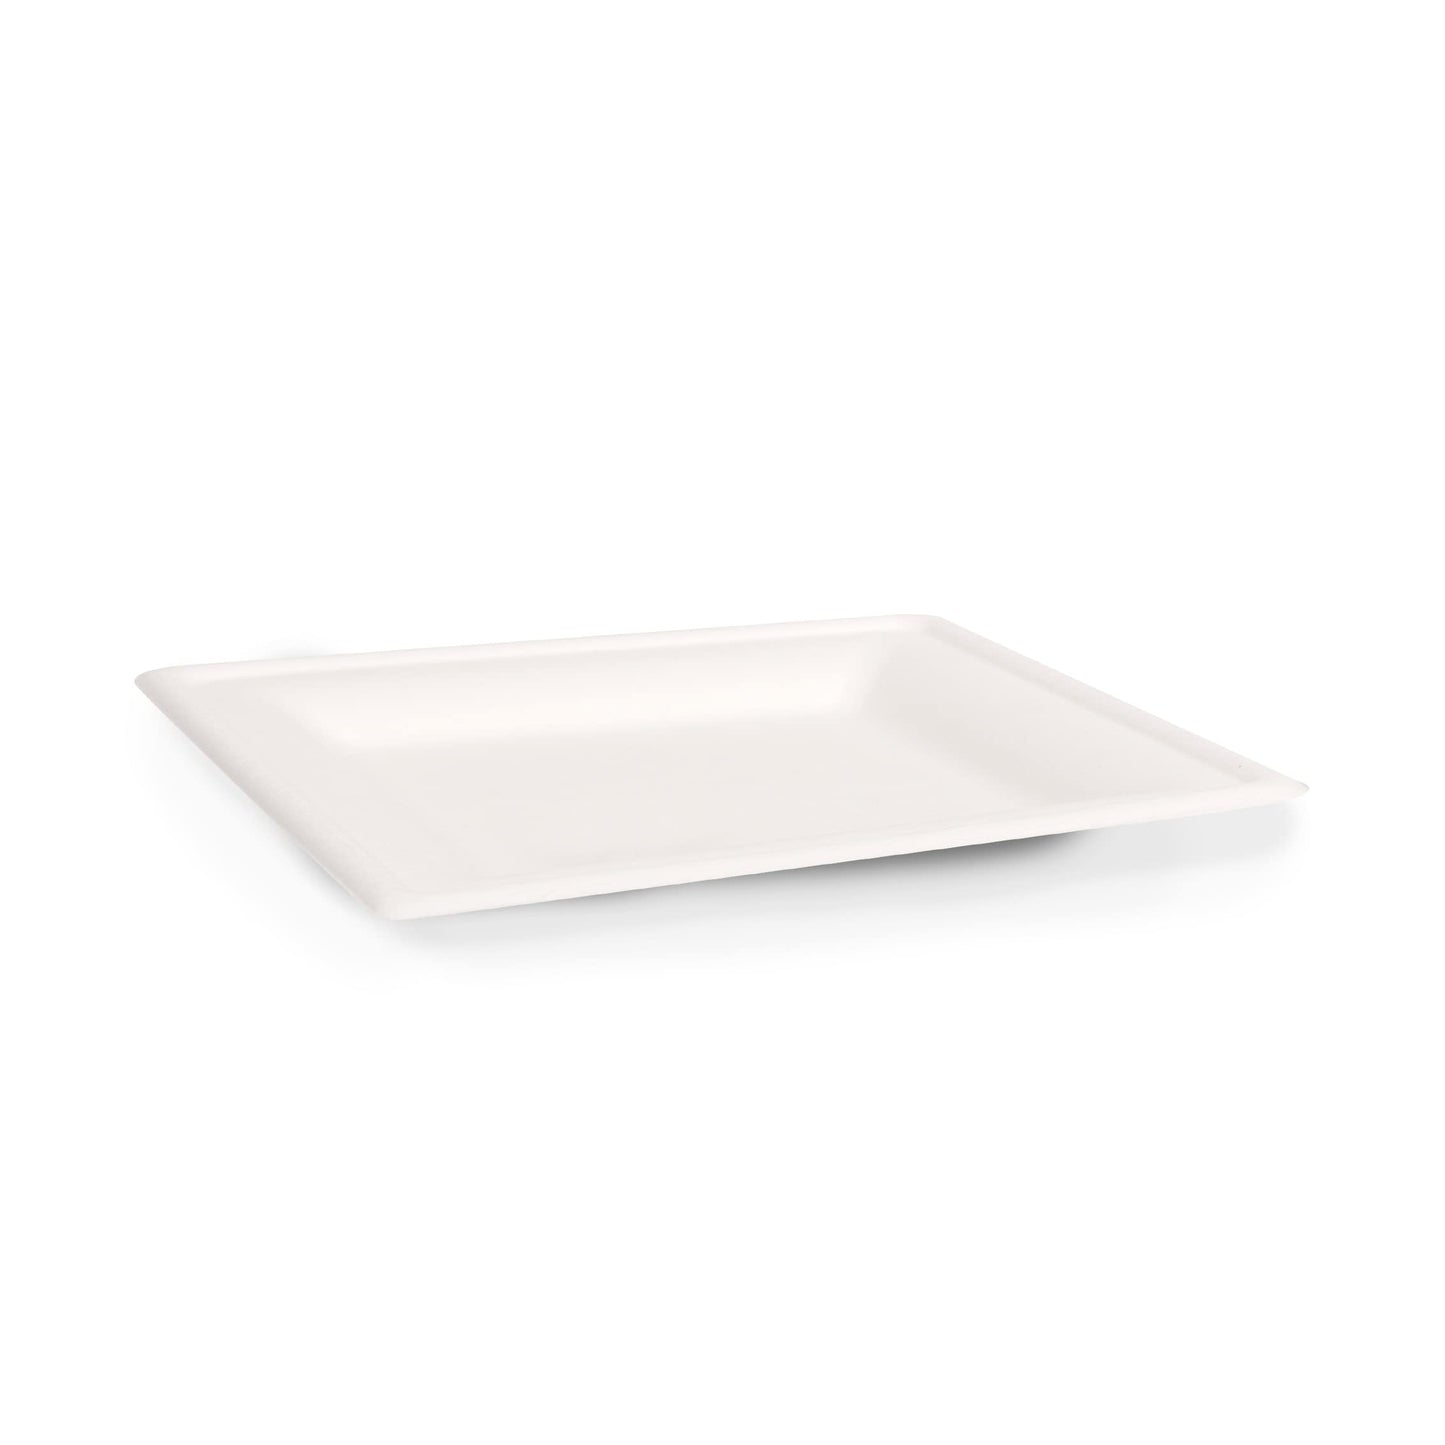 Fun Sukkar Pulp Square Plate 10x10 inch Eco-Friendly Disposable Dinnerware white plate for party, Camping,Compostable,Recyclable and biodegradable Picnic Plates (Pack of 10)